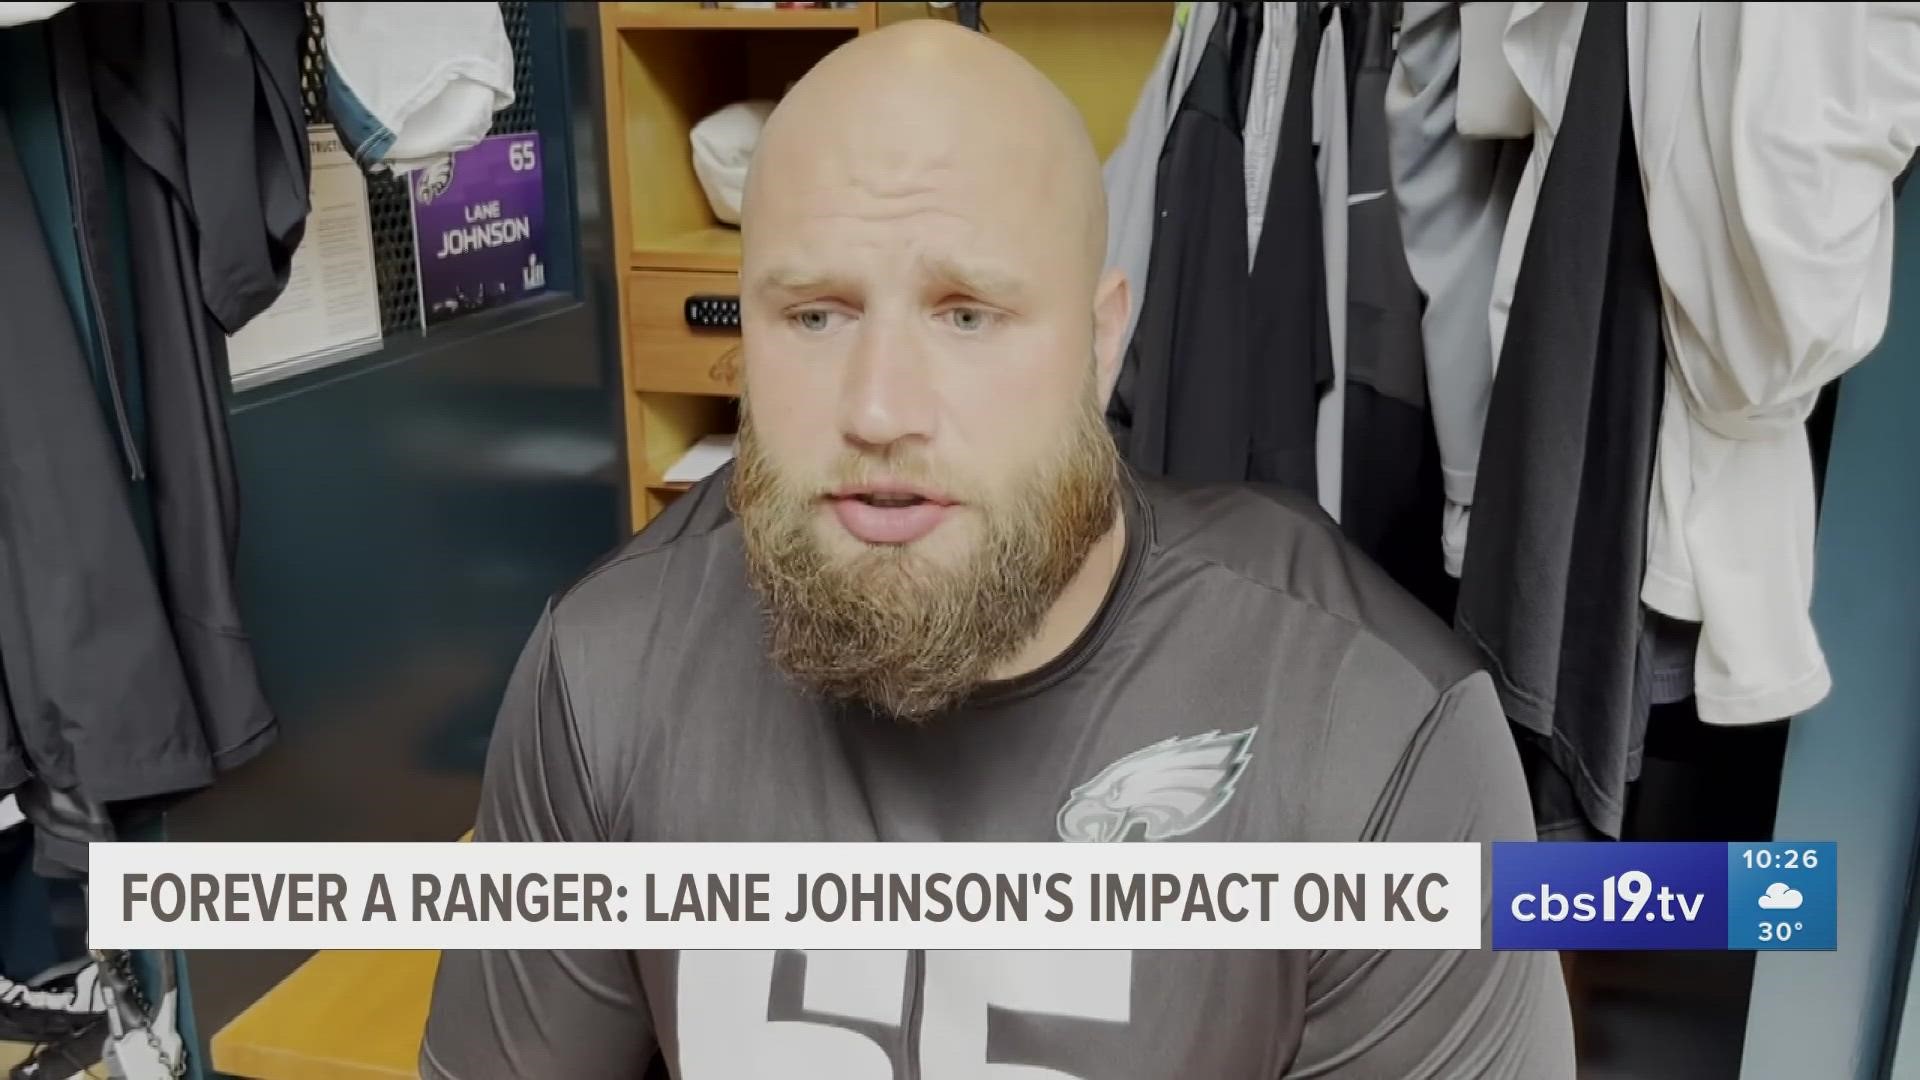 As Philadelphia Eagles tackle Lane Johnson looks to win his second Super Bowl, CBS19 looks back at his contributions to Kilgore College.